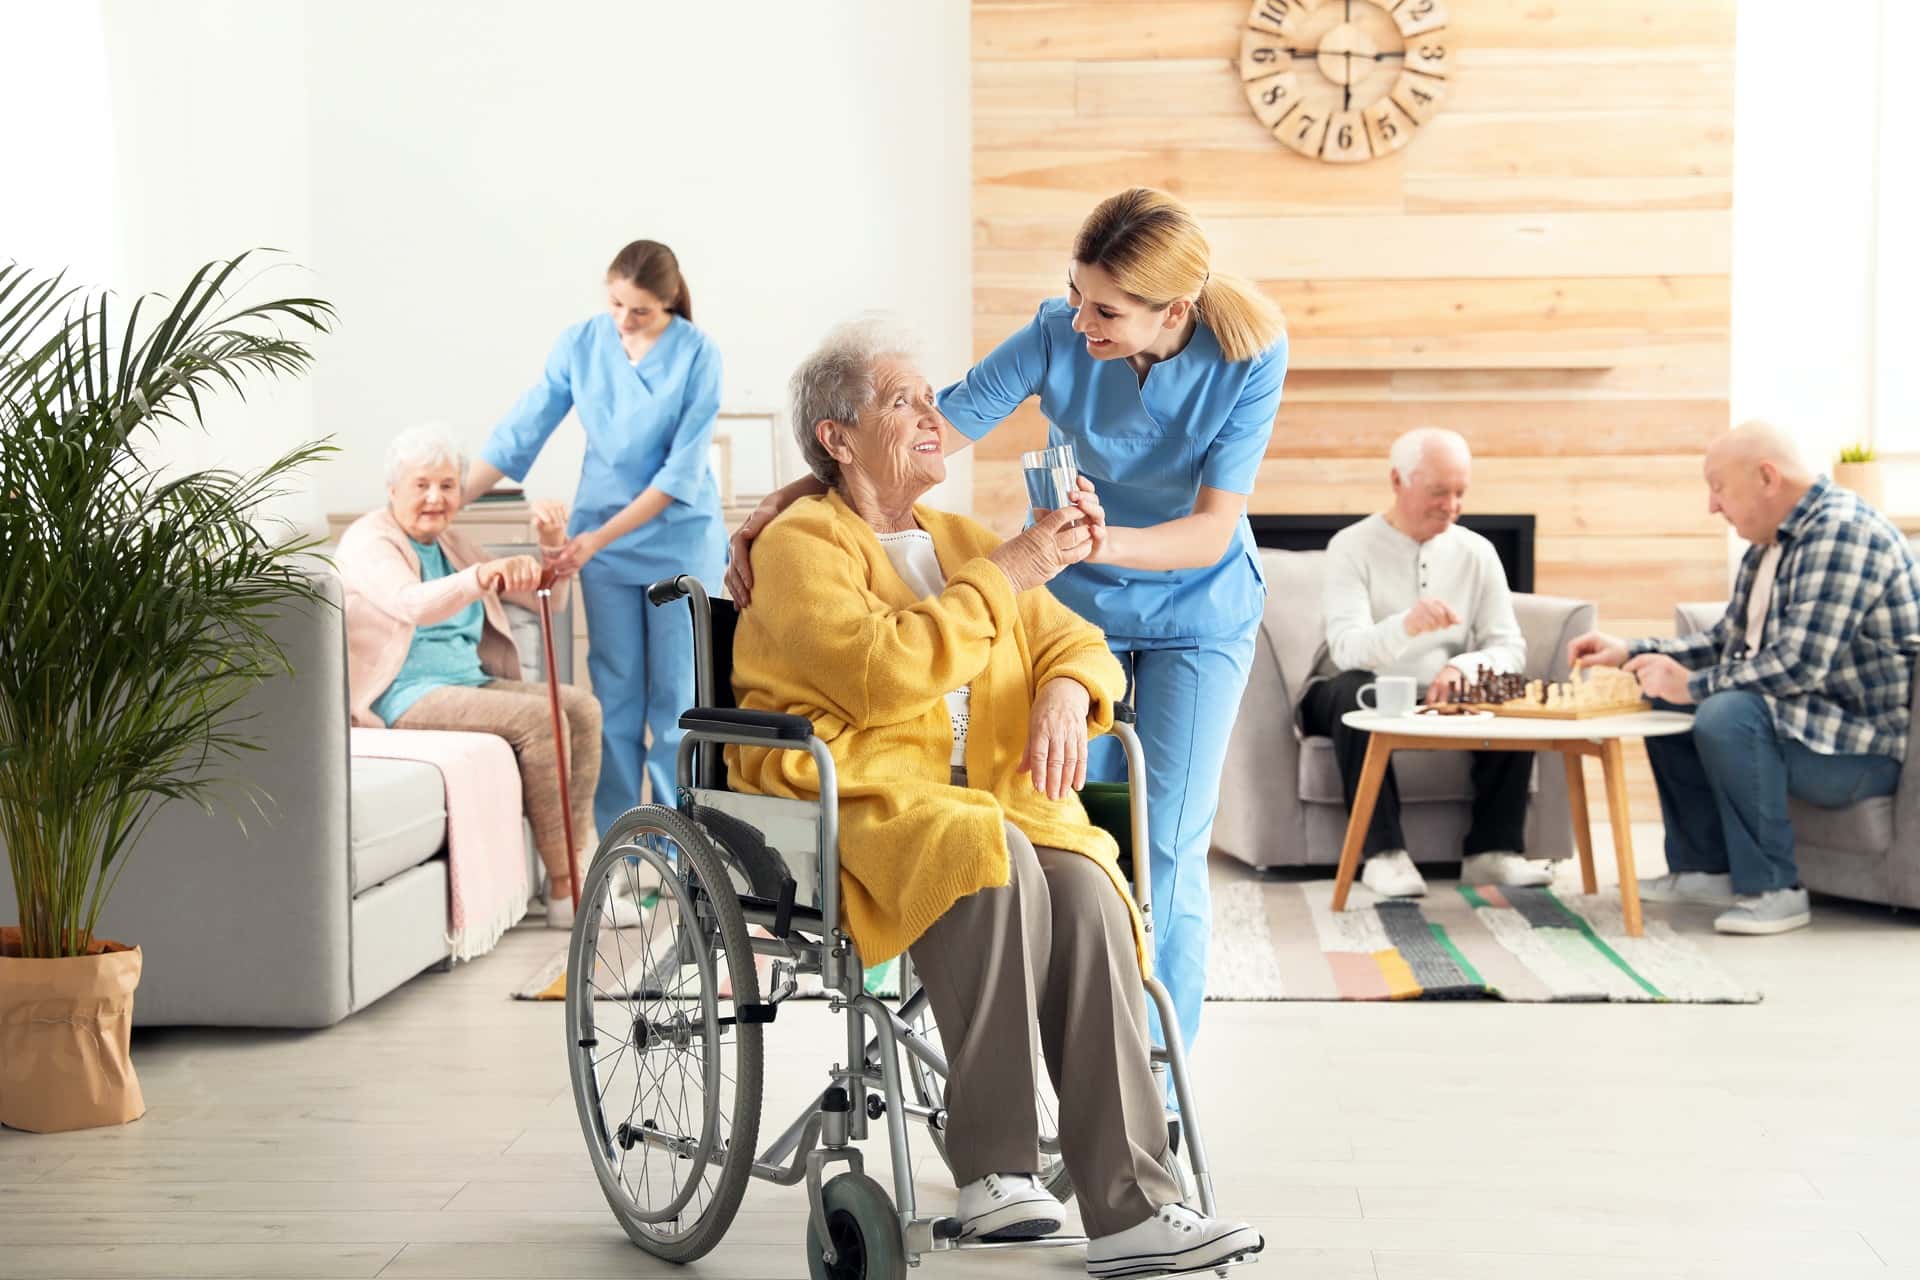 How the Pandemic Will Change Arizona Nursing Home Standards Moving Forward